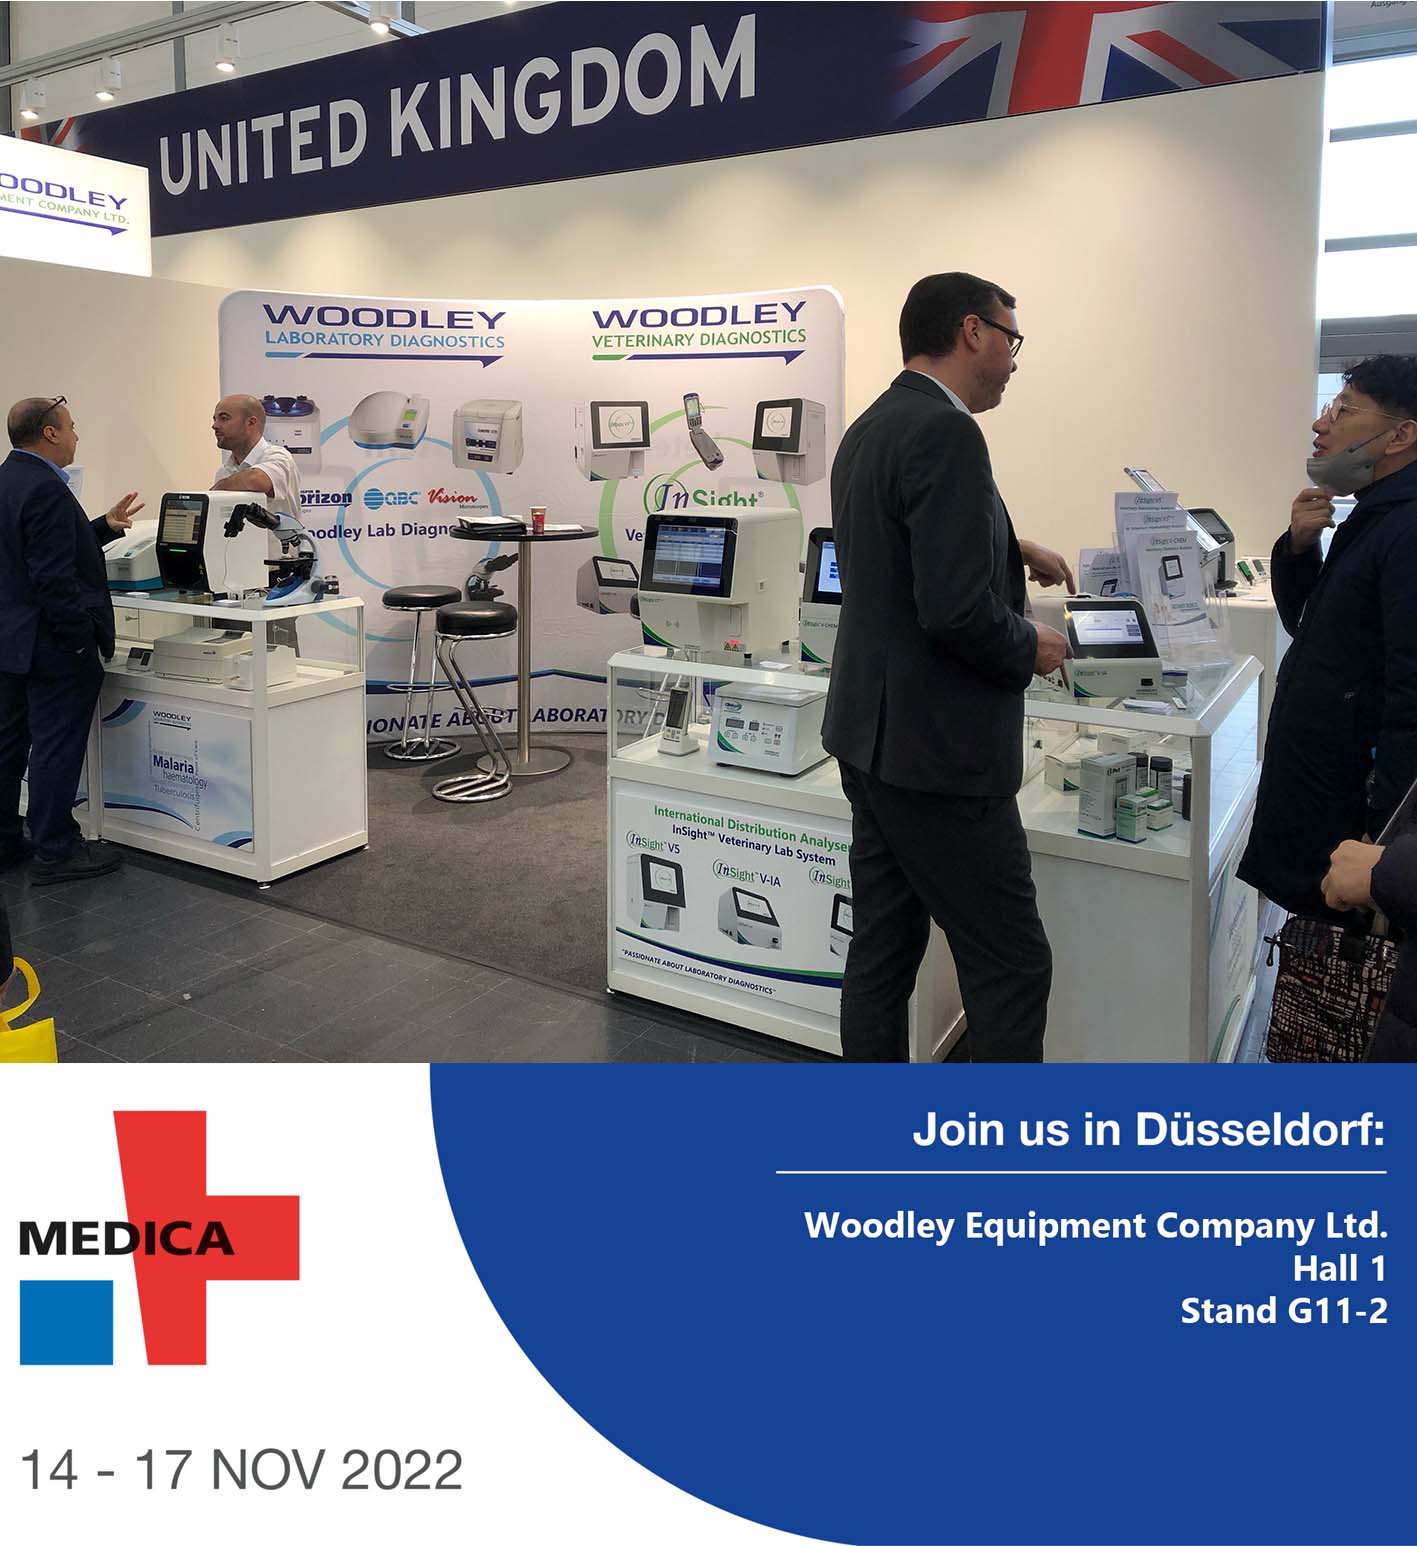 Woodley are Exhibiting at Medica 2022